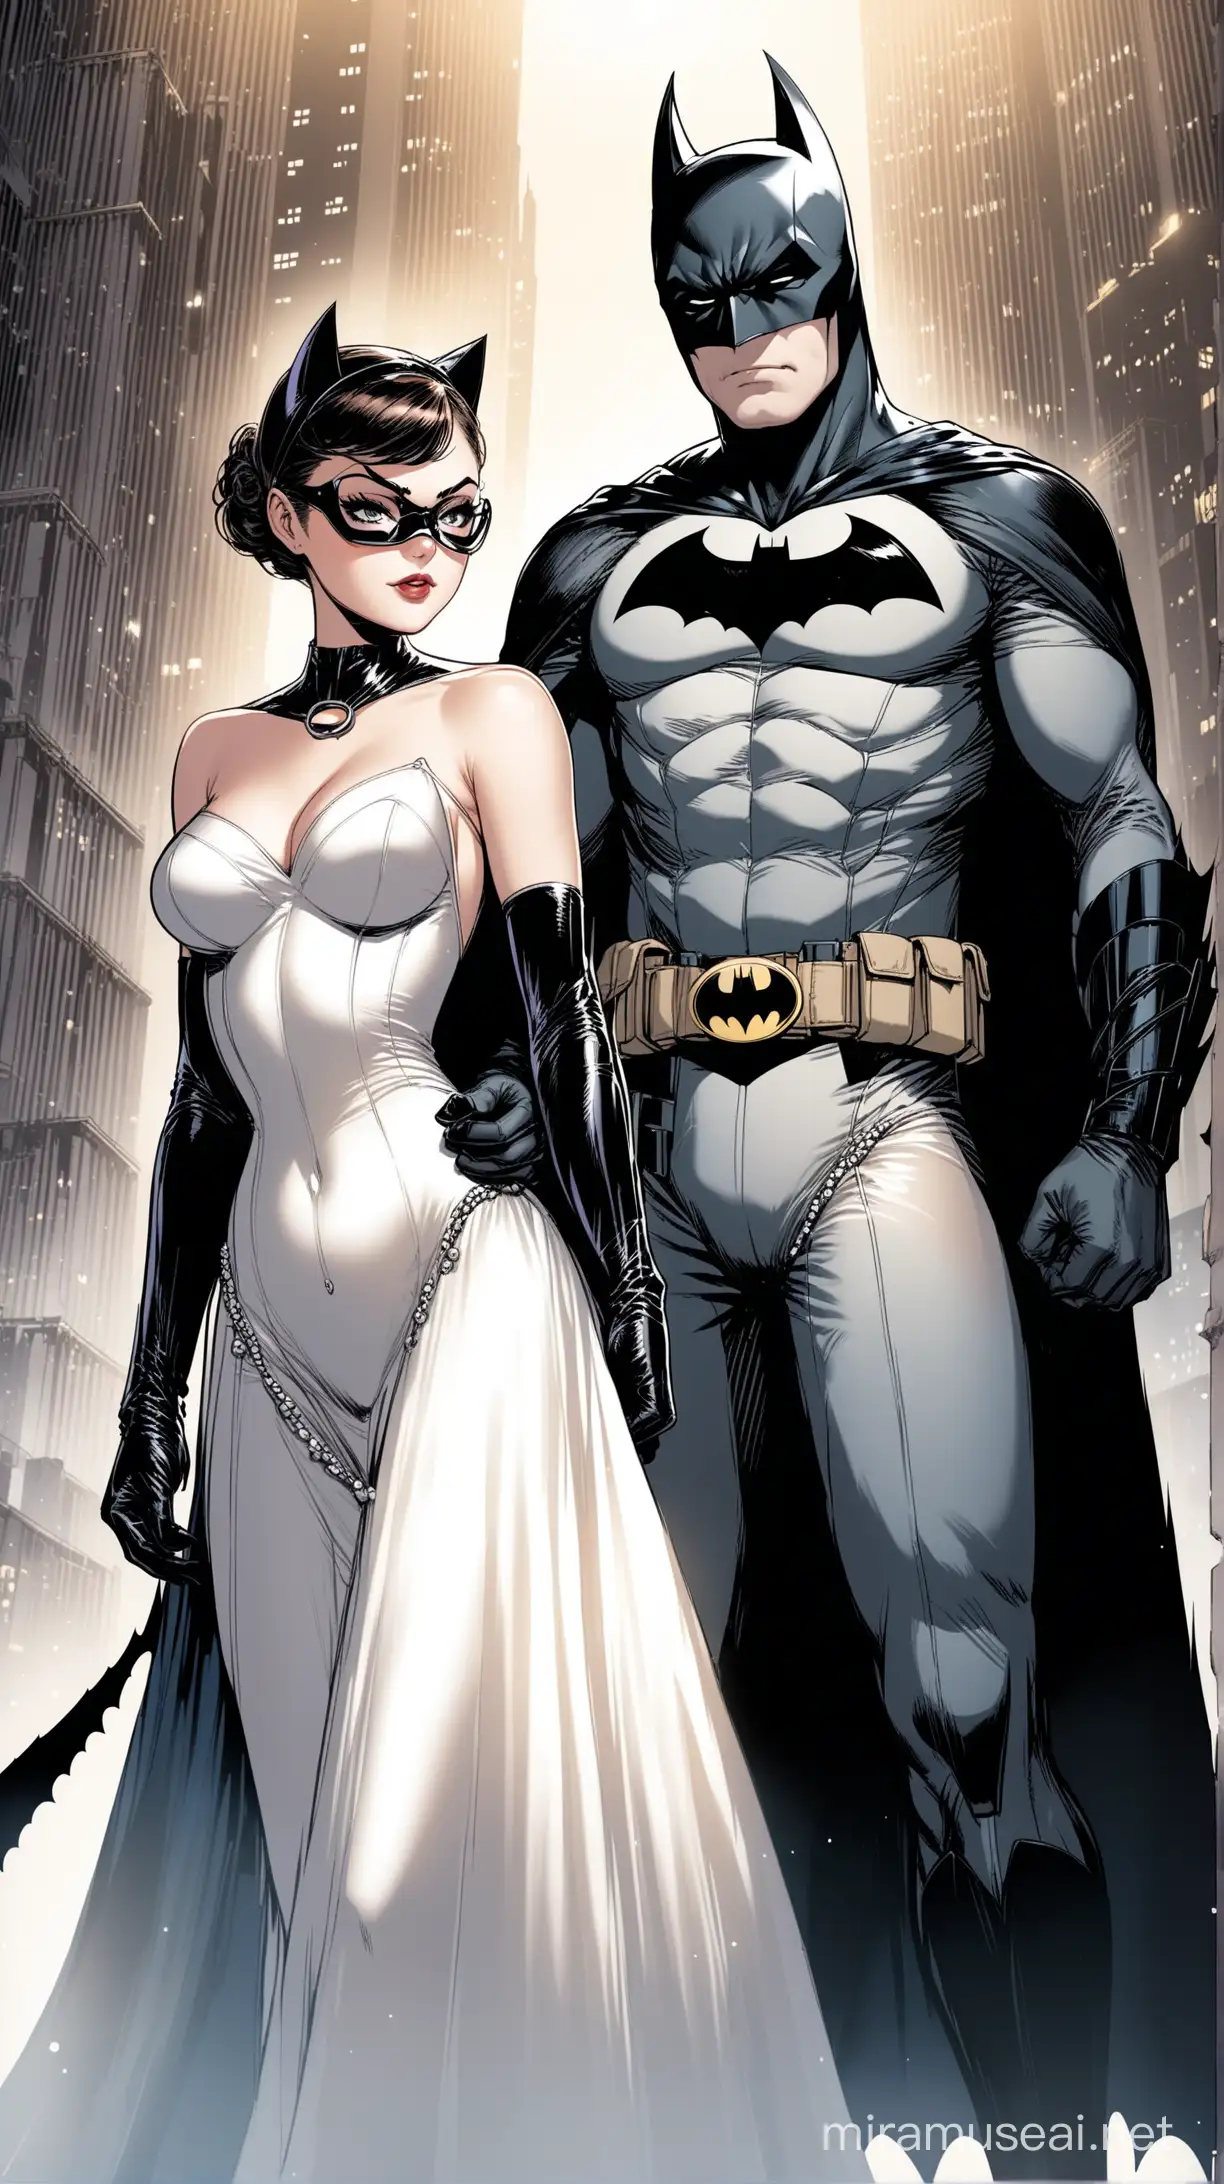 Batman Catwoman, batman in black and Catwoman in white dress, super attractive power couple